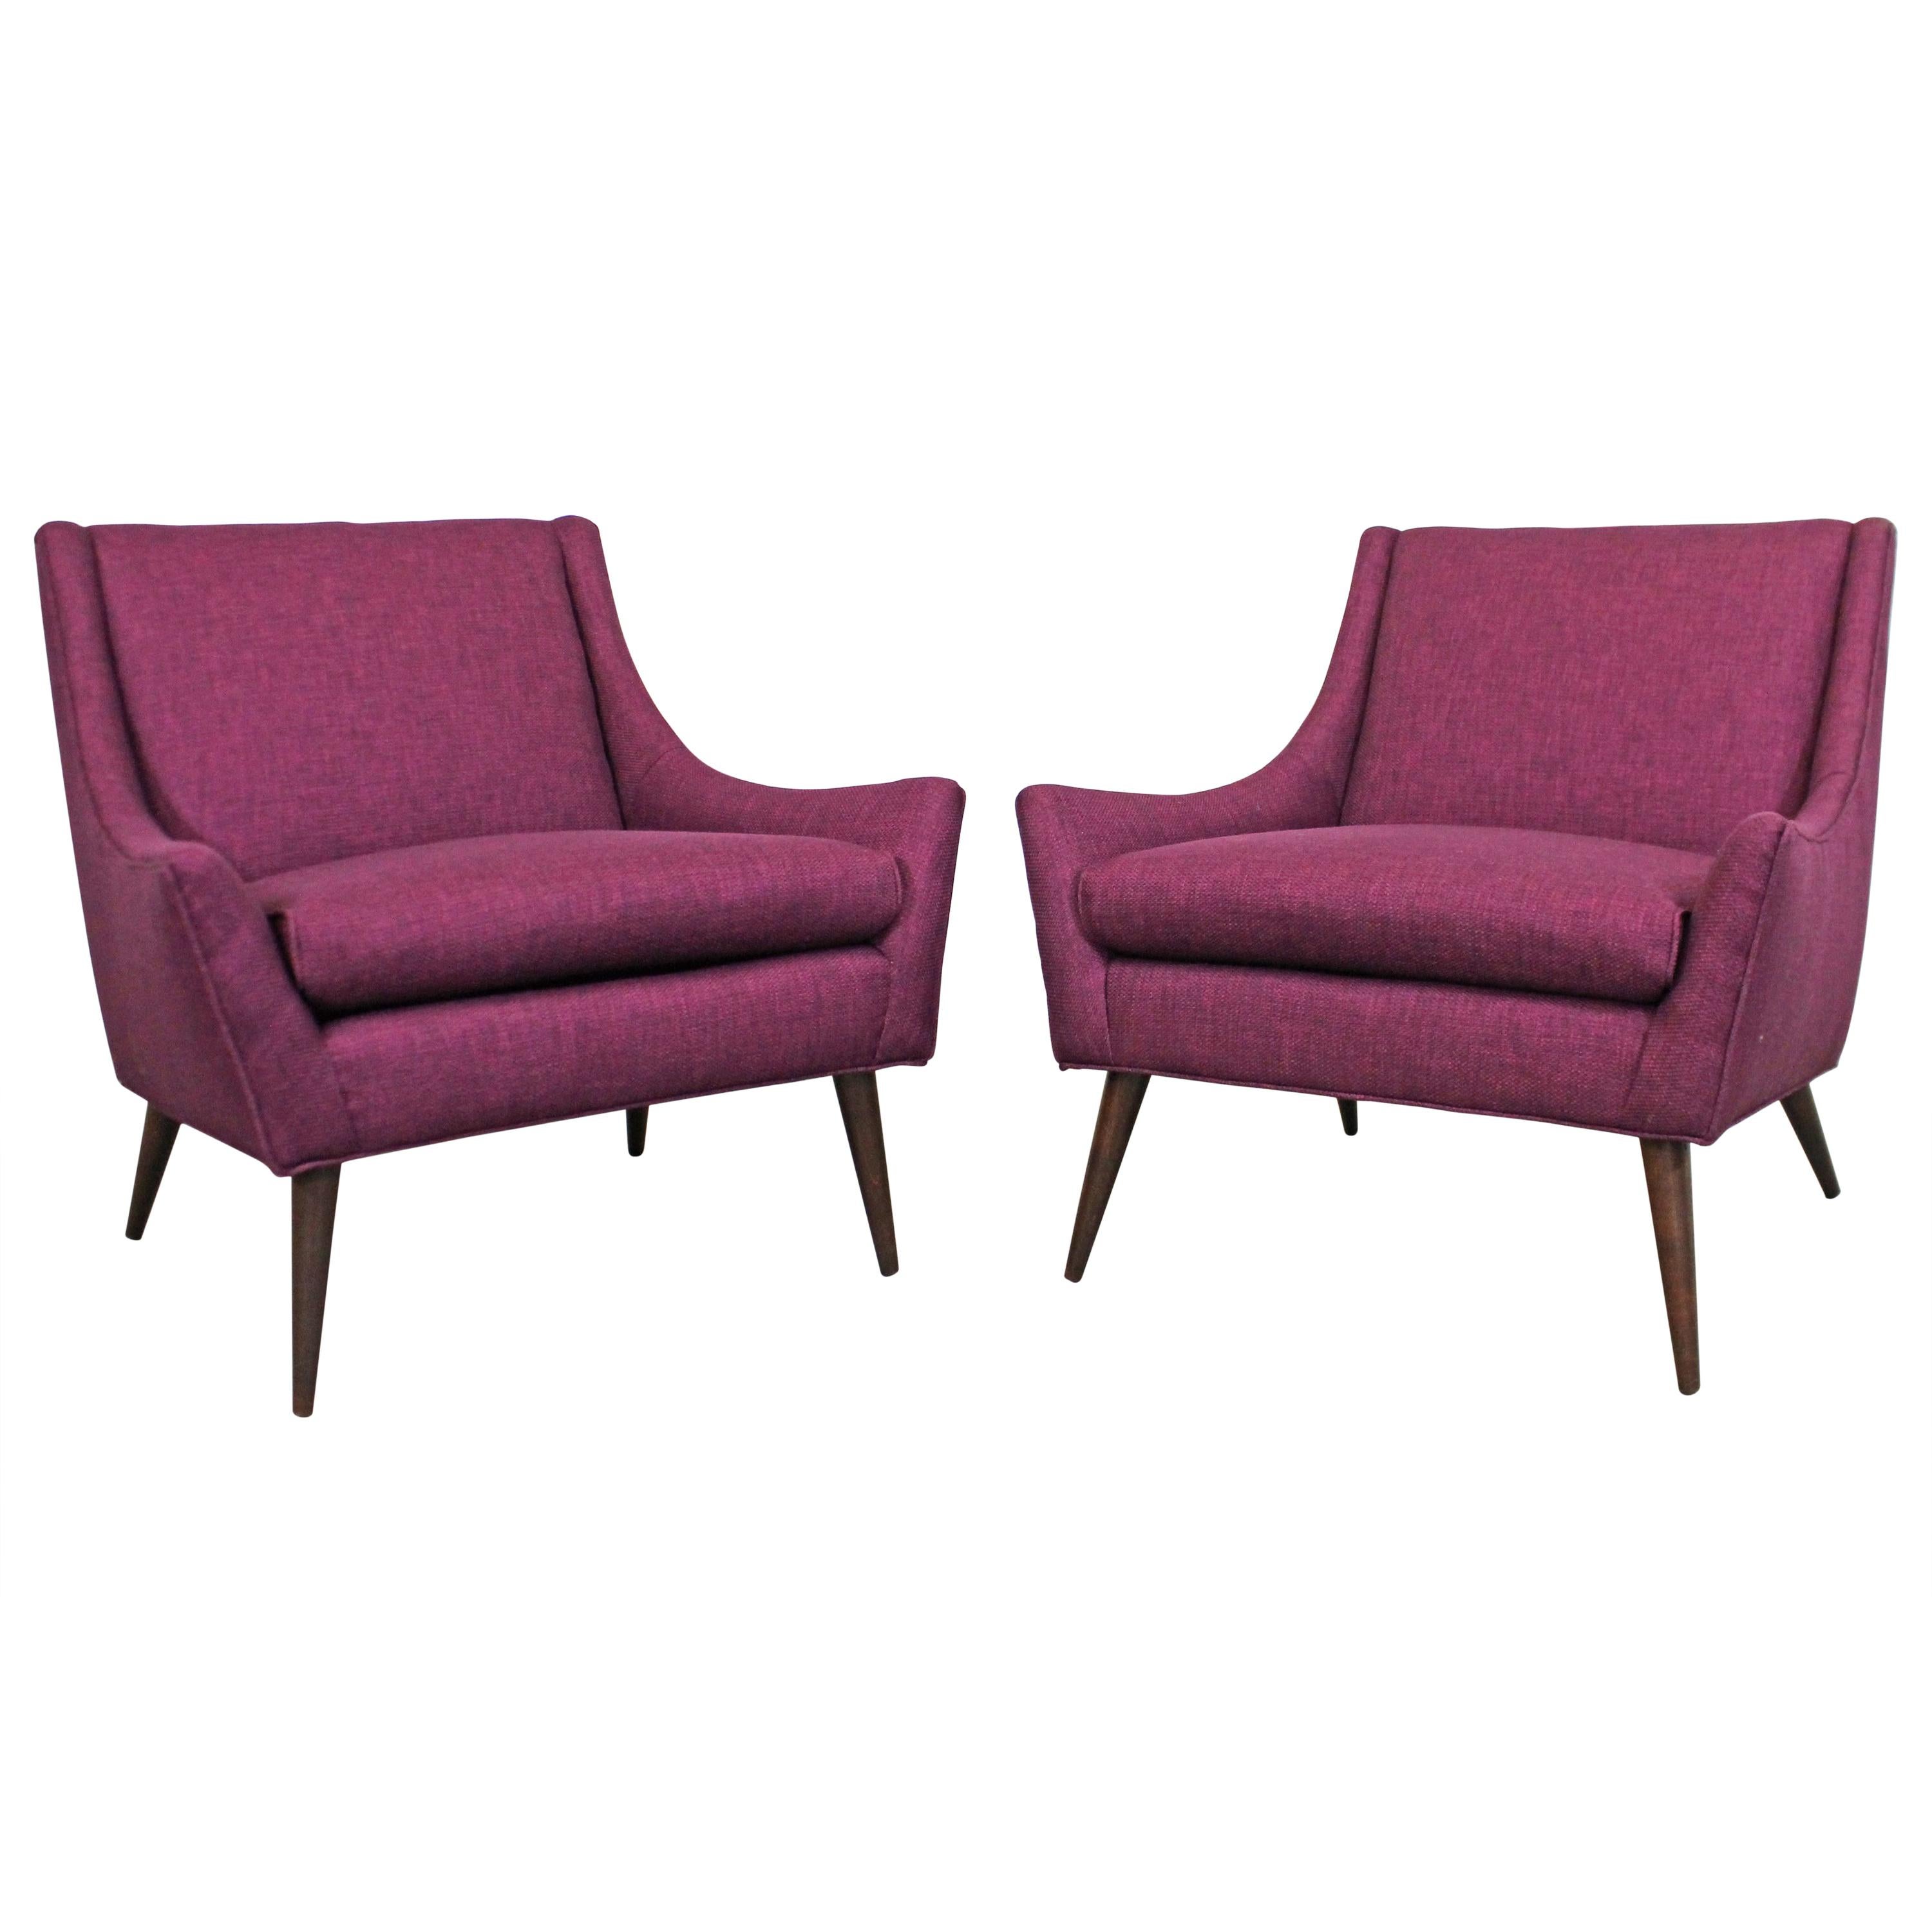 Pair of Mid-Century Modern Paul McCobb Style Lounge Chairs